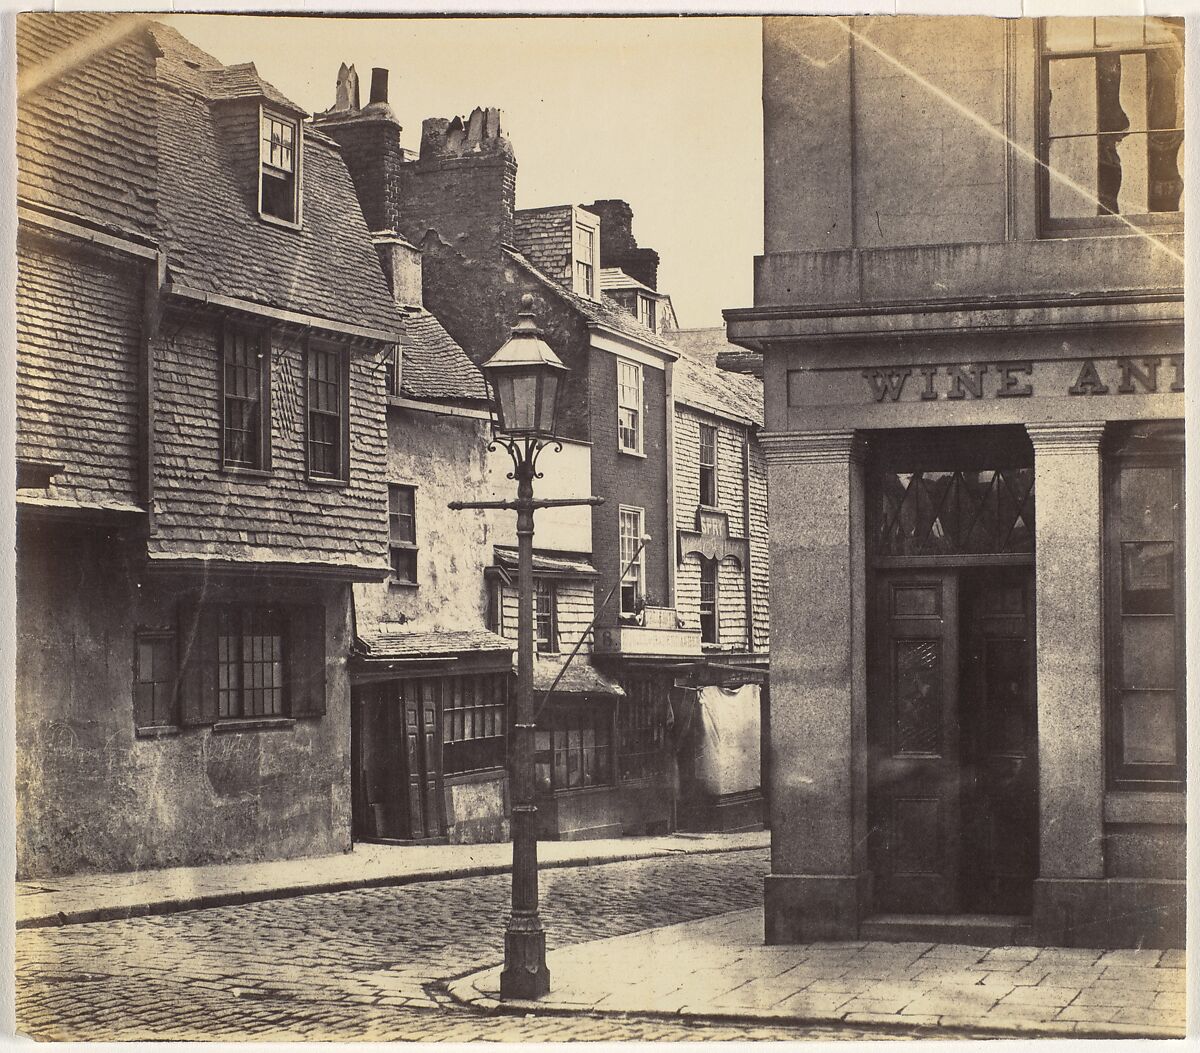 [Street with Lamp Post and Wine Shop], Unknown (British), Albumen silver print 